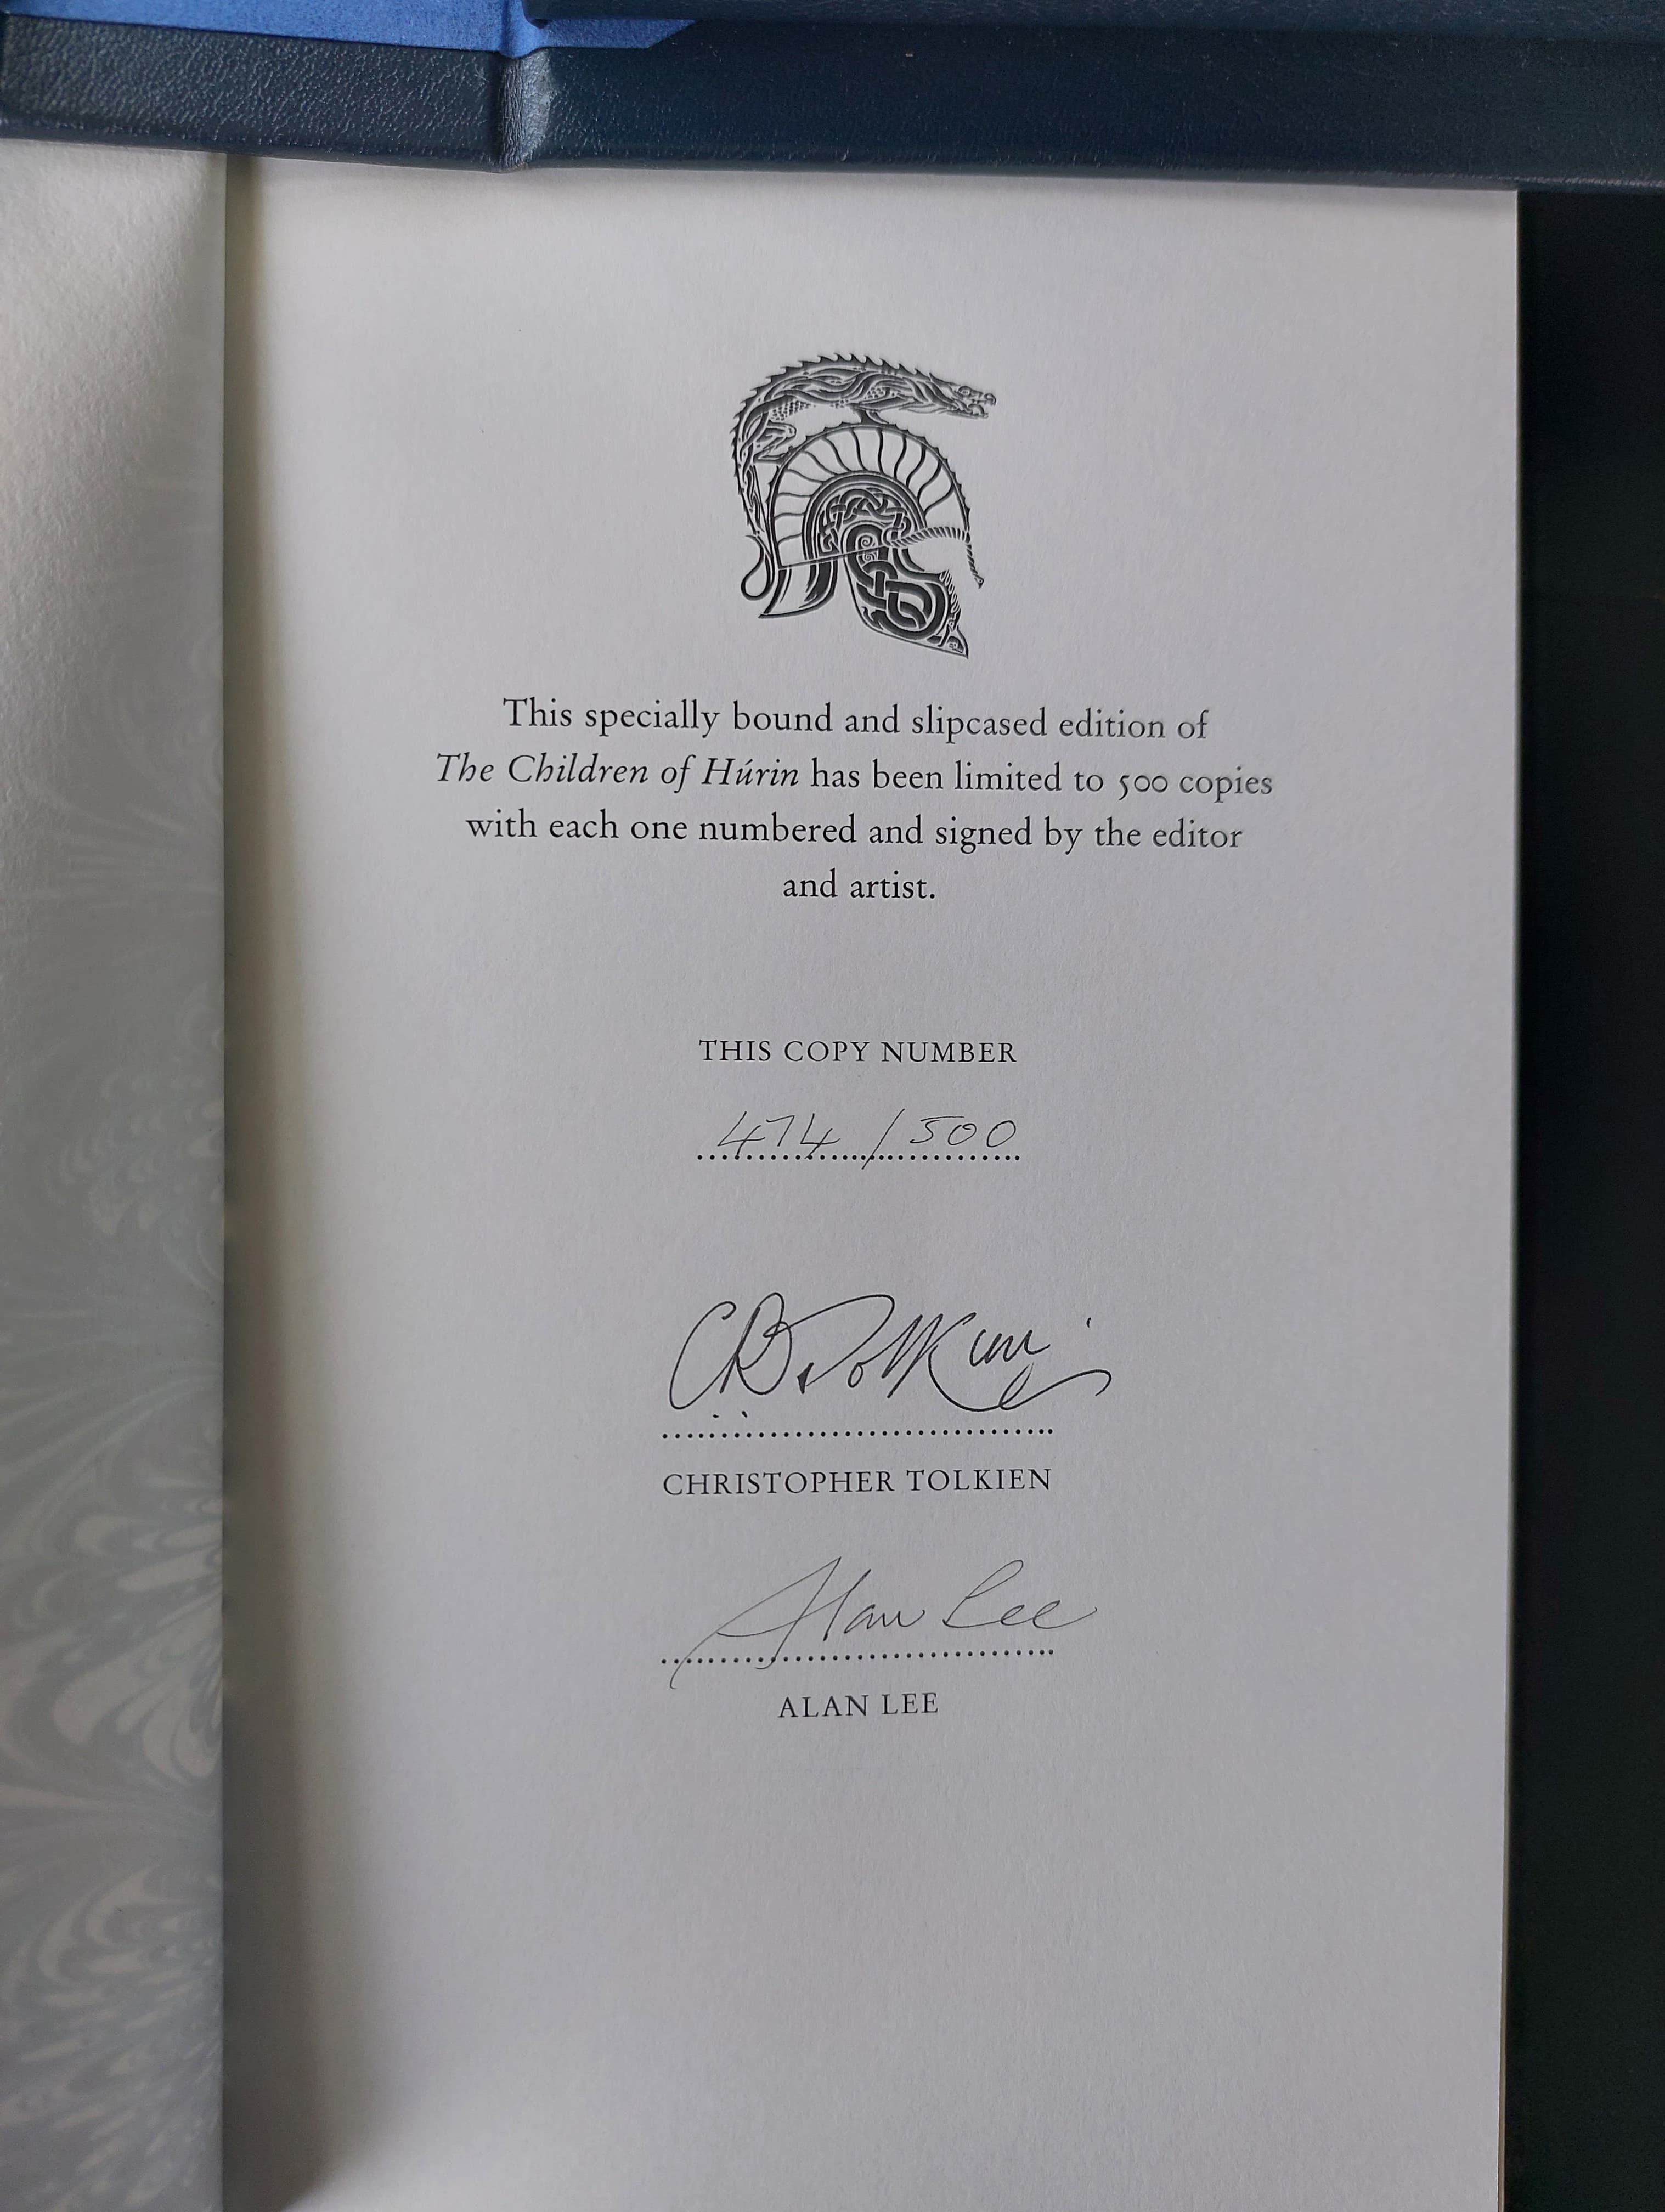 
The Children of Hurin, Signed Limited Numbered Super Deluxe Edition 1